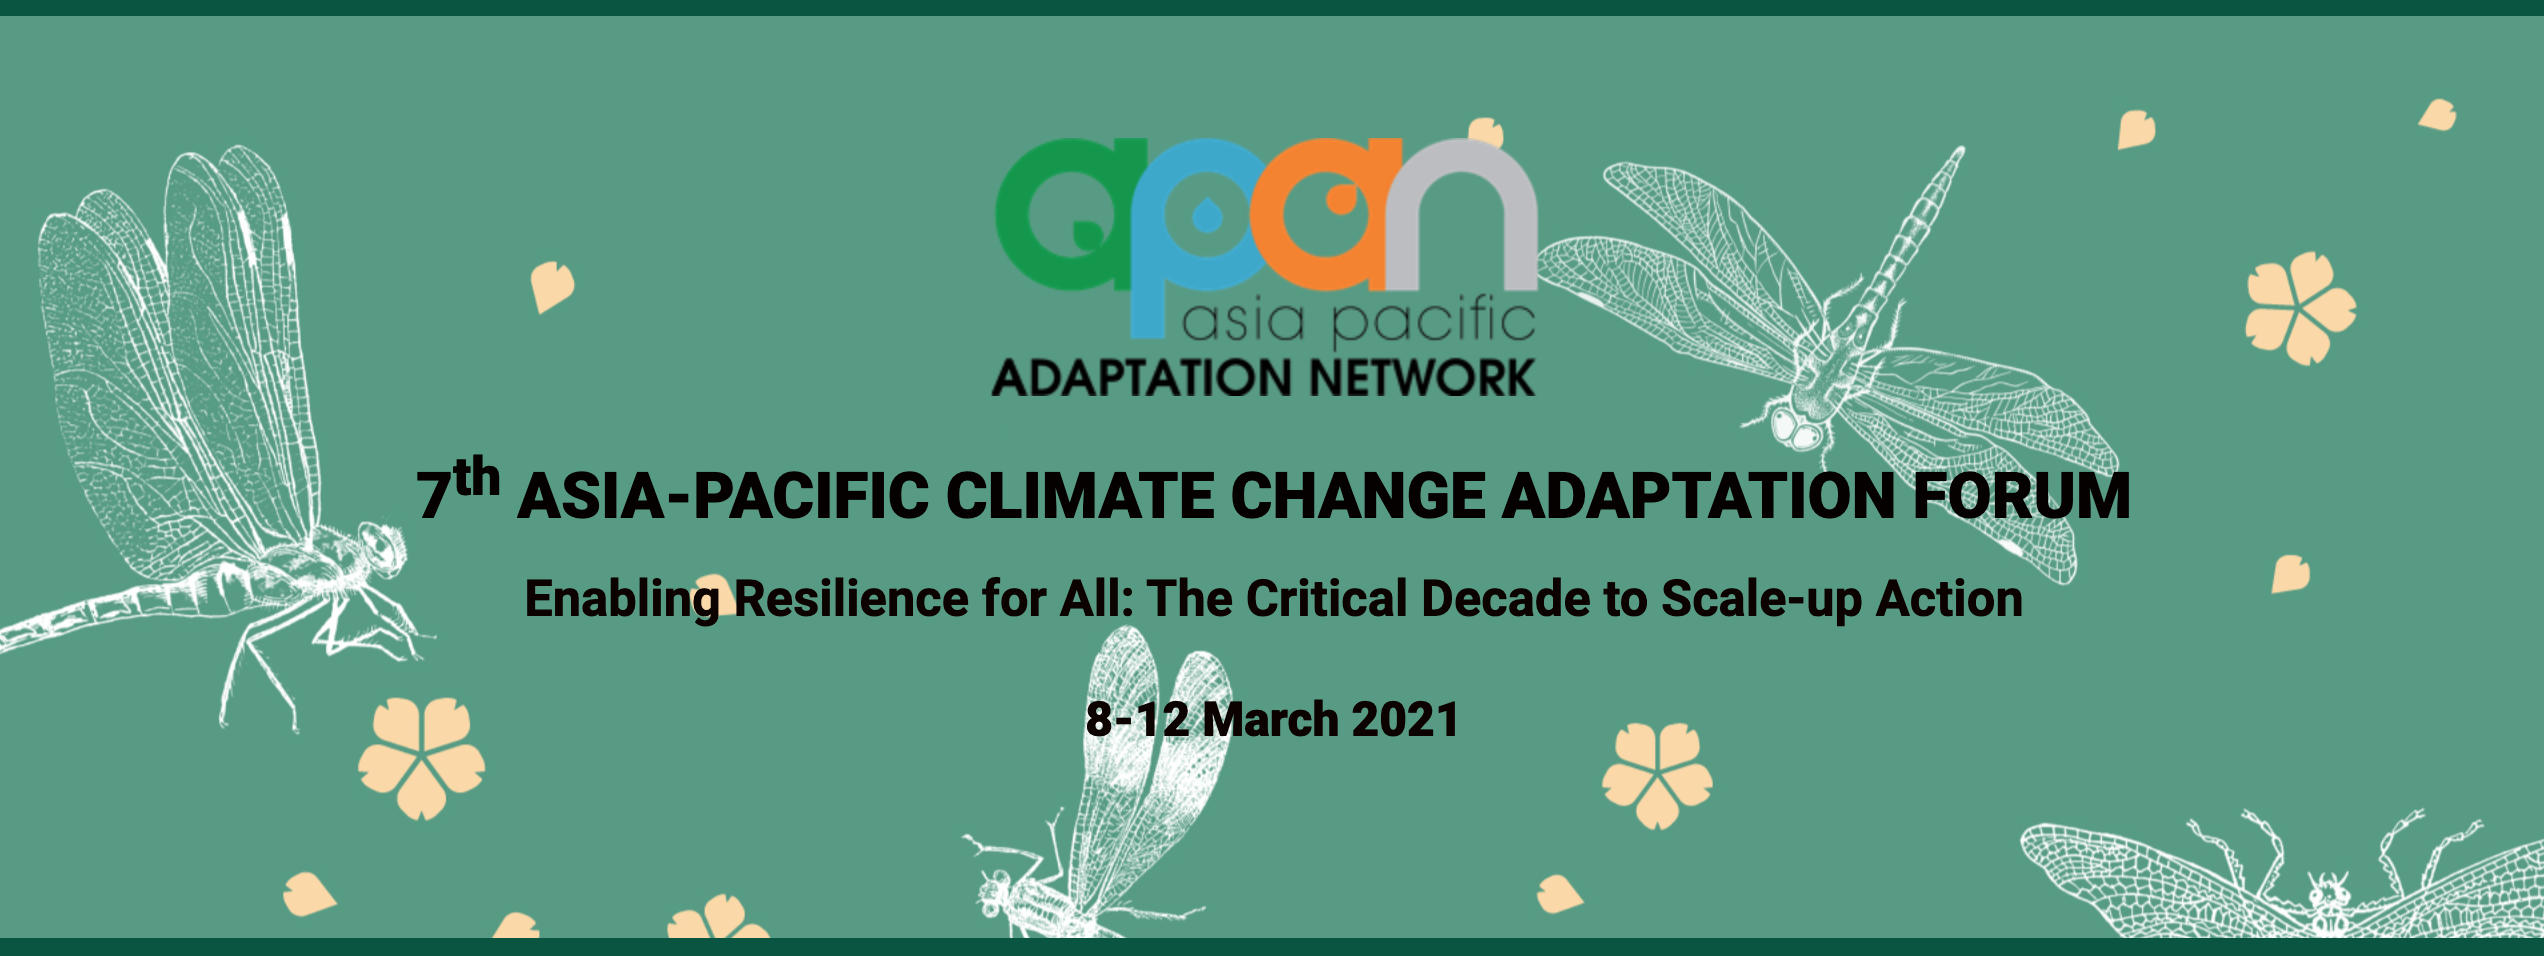 Asia pacific adaptation network